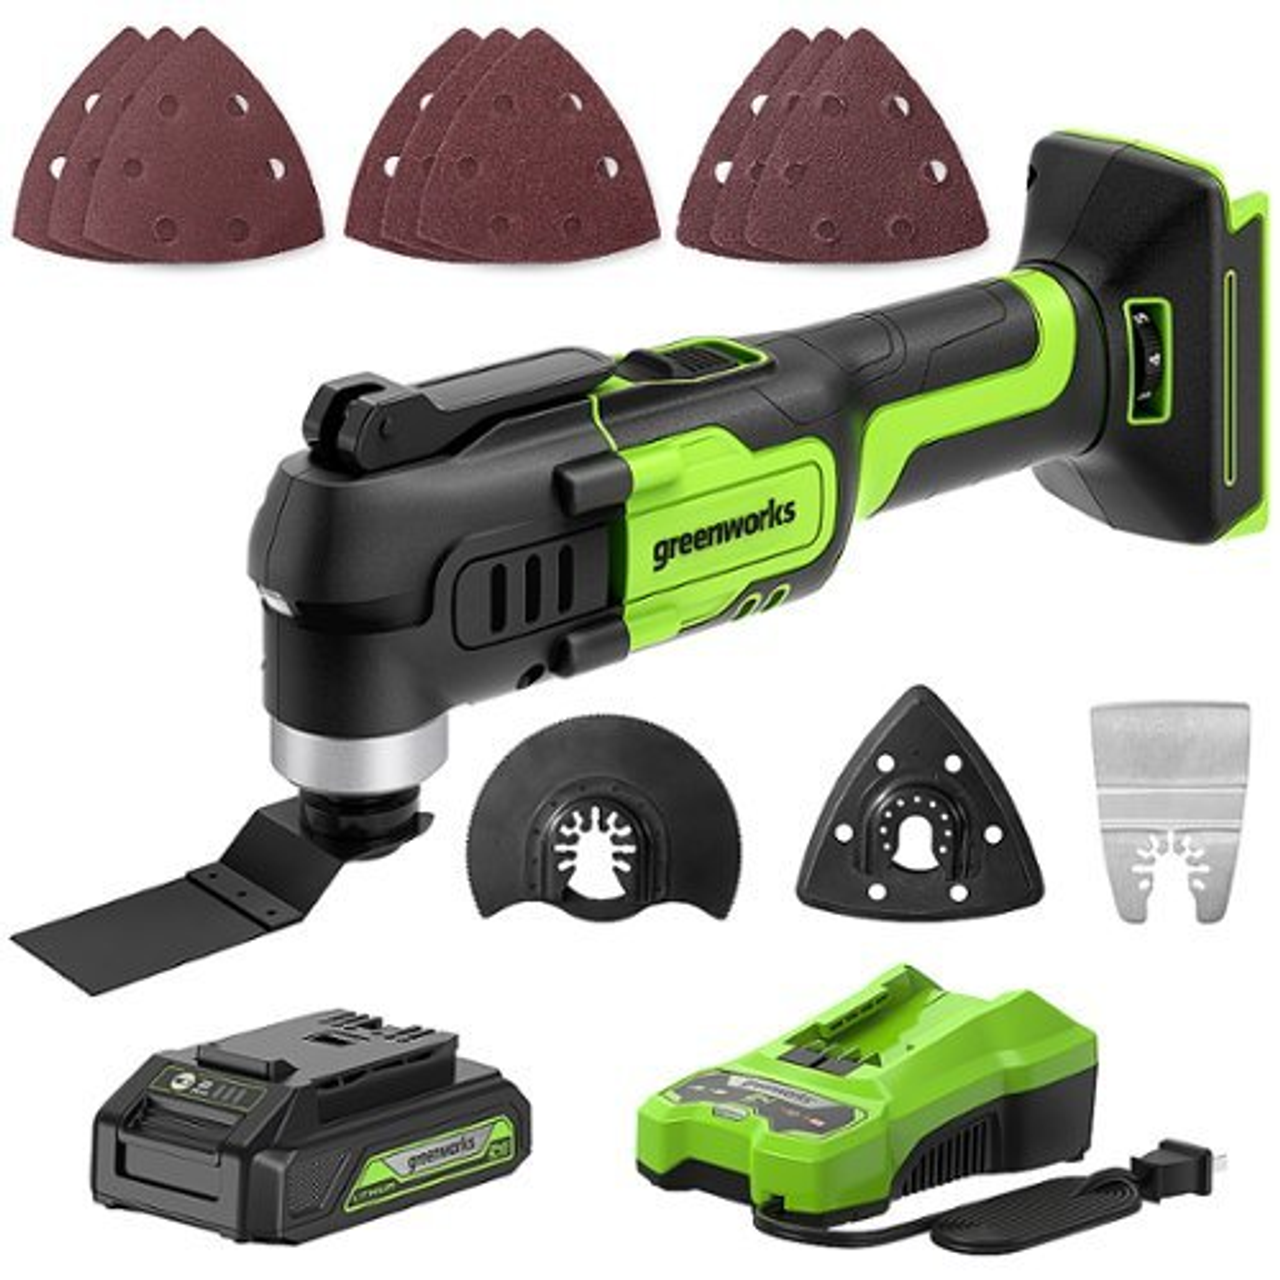 Greenworks Multi Tool w. 2AH battery, 2A charger - Green